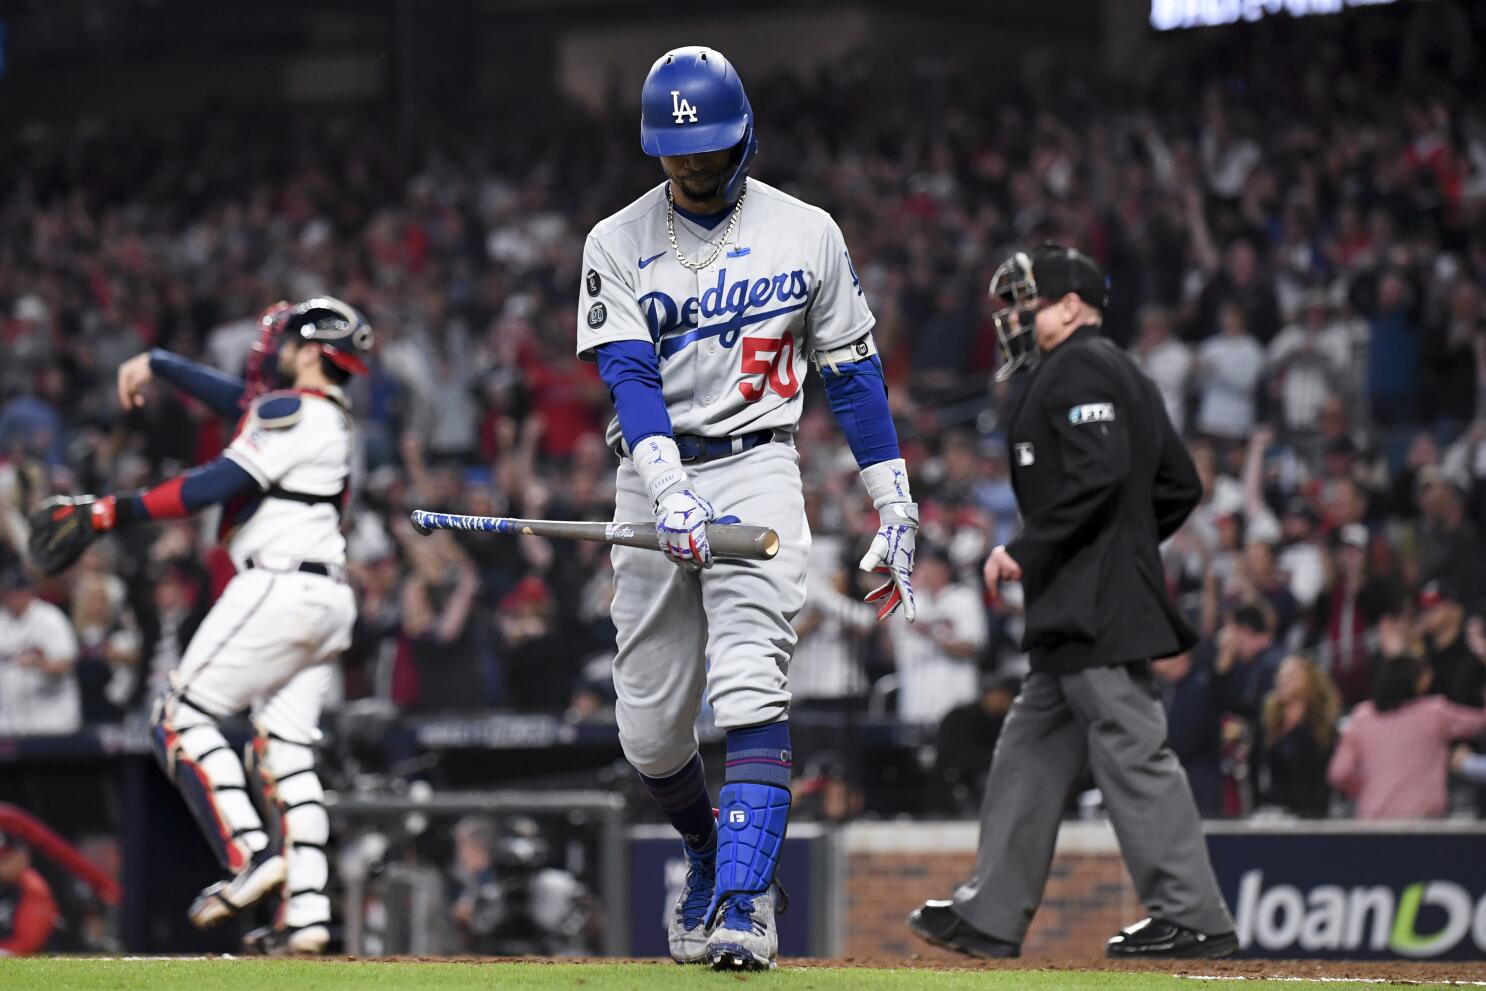 Dodgers beat Braves, advance to World Series